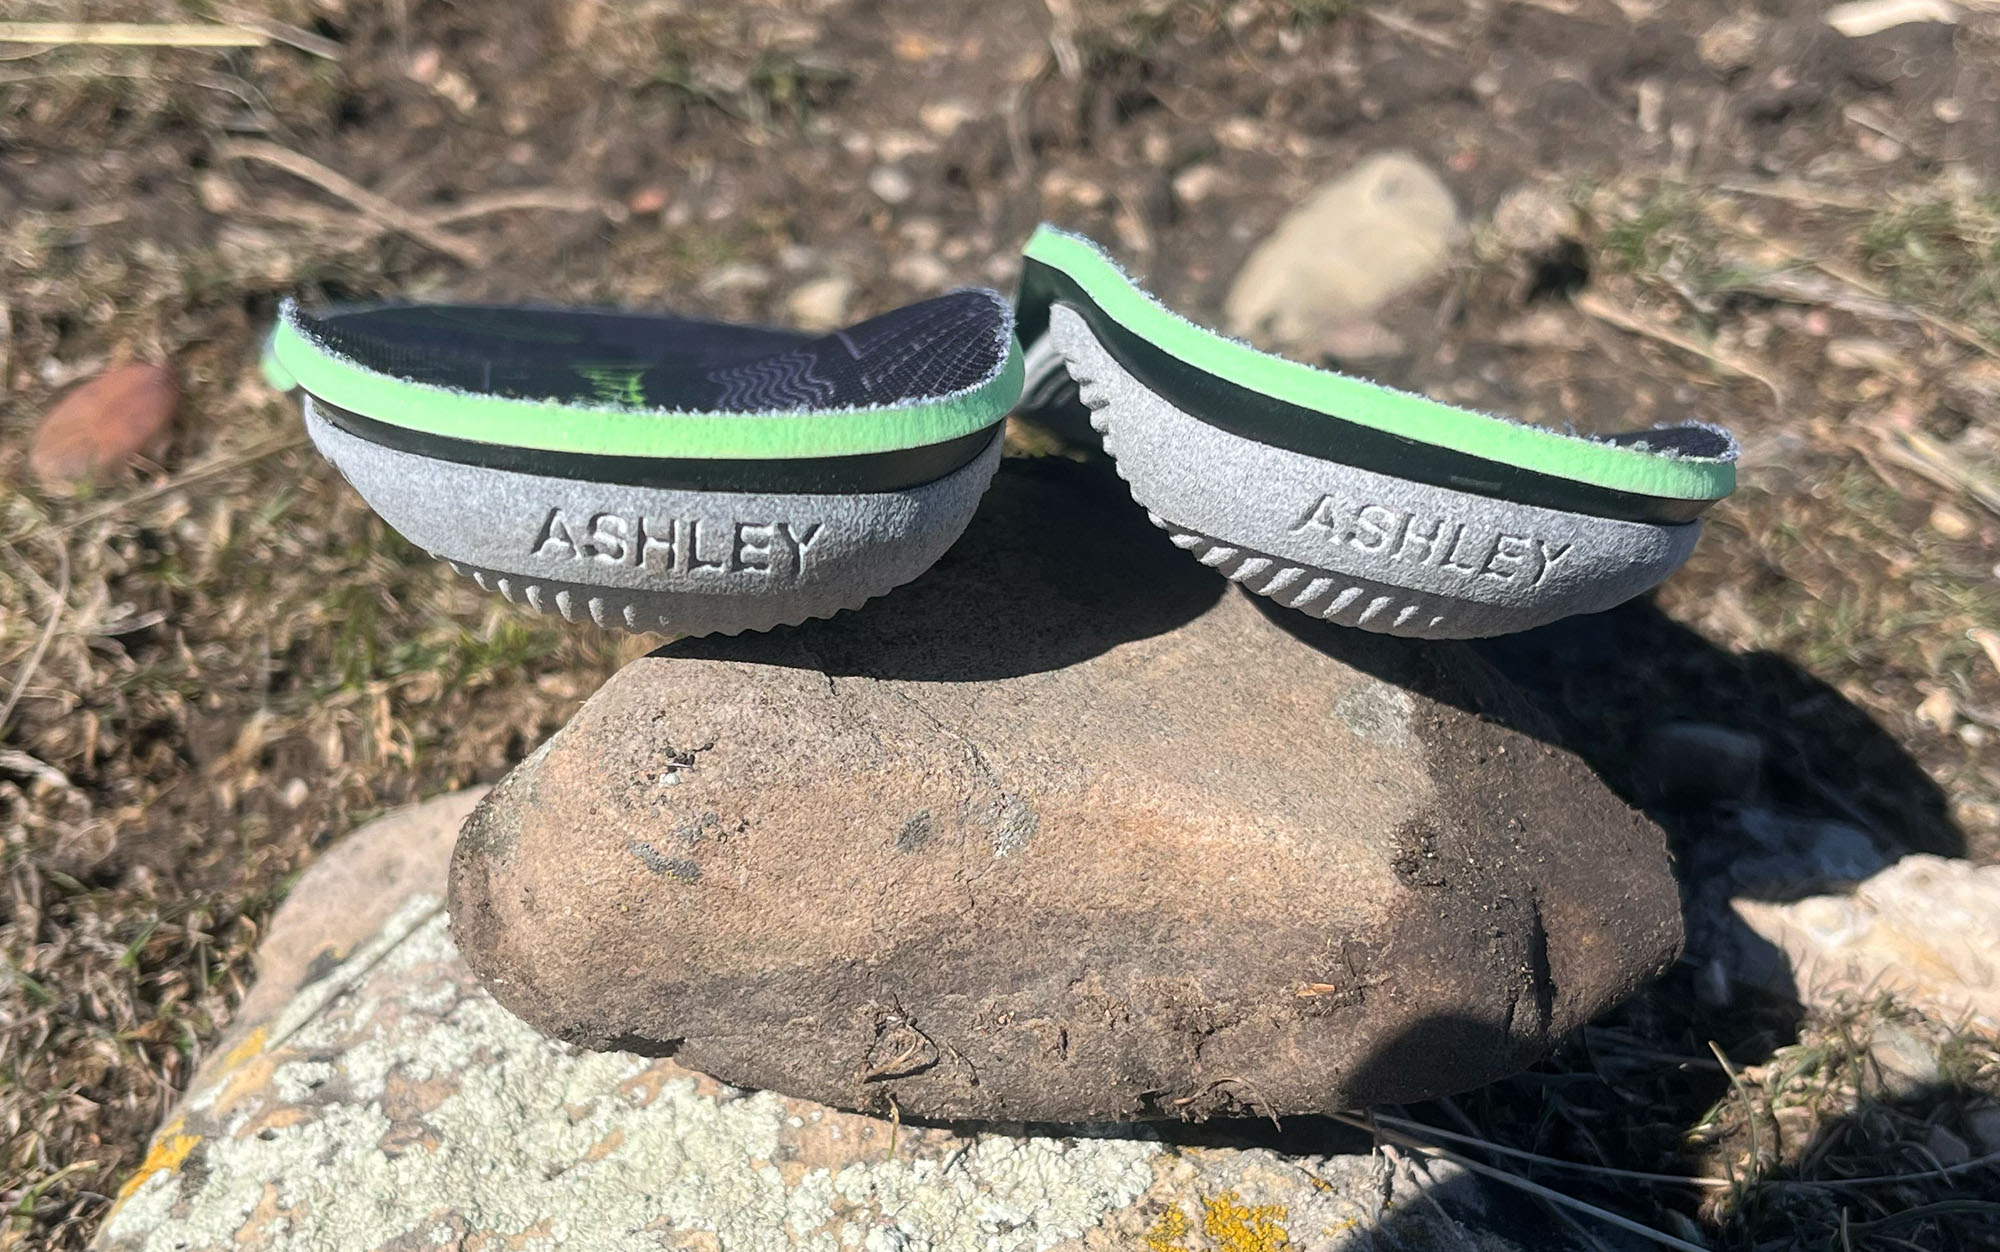 My personalized insoles featured my name engraved on the back, but thatâs not the only customization.